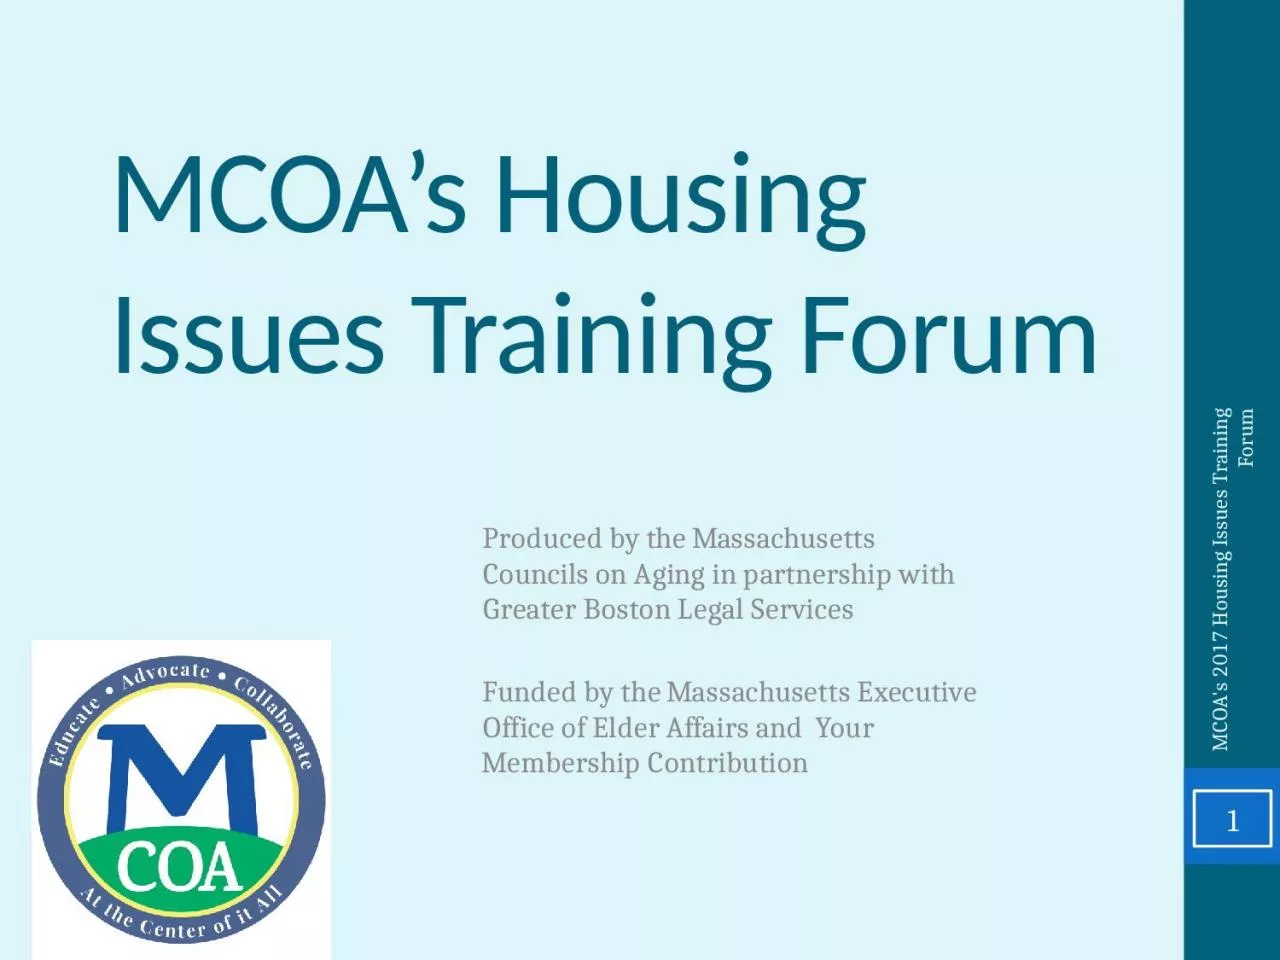 MCOA’s Housing Issues Training Forum